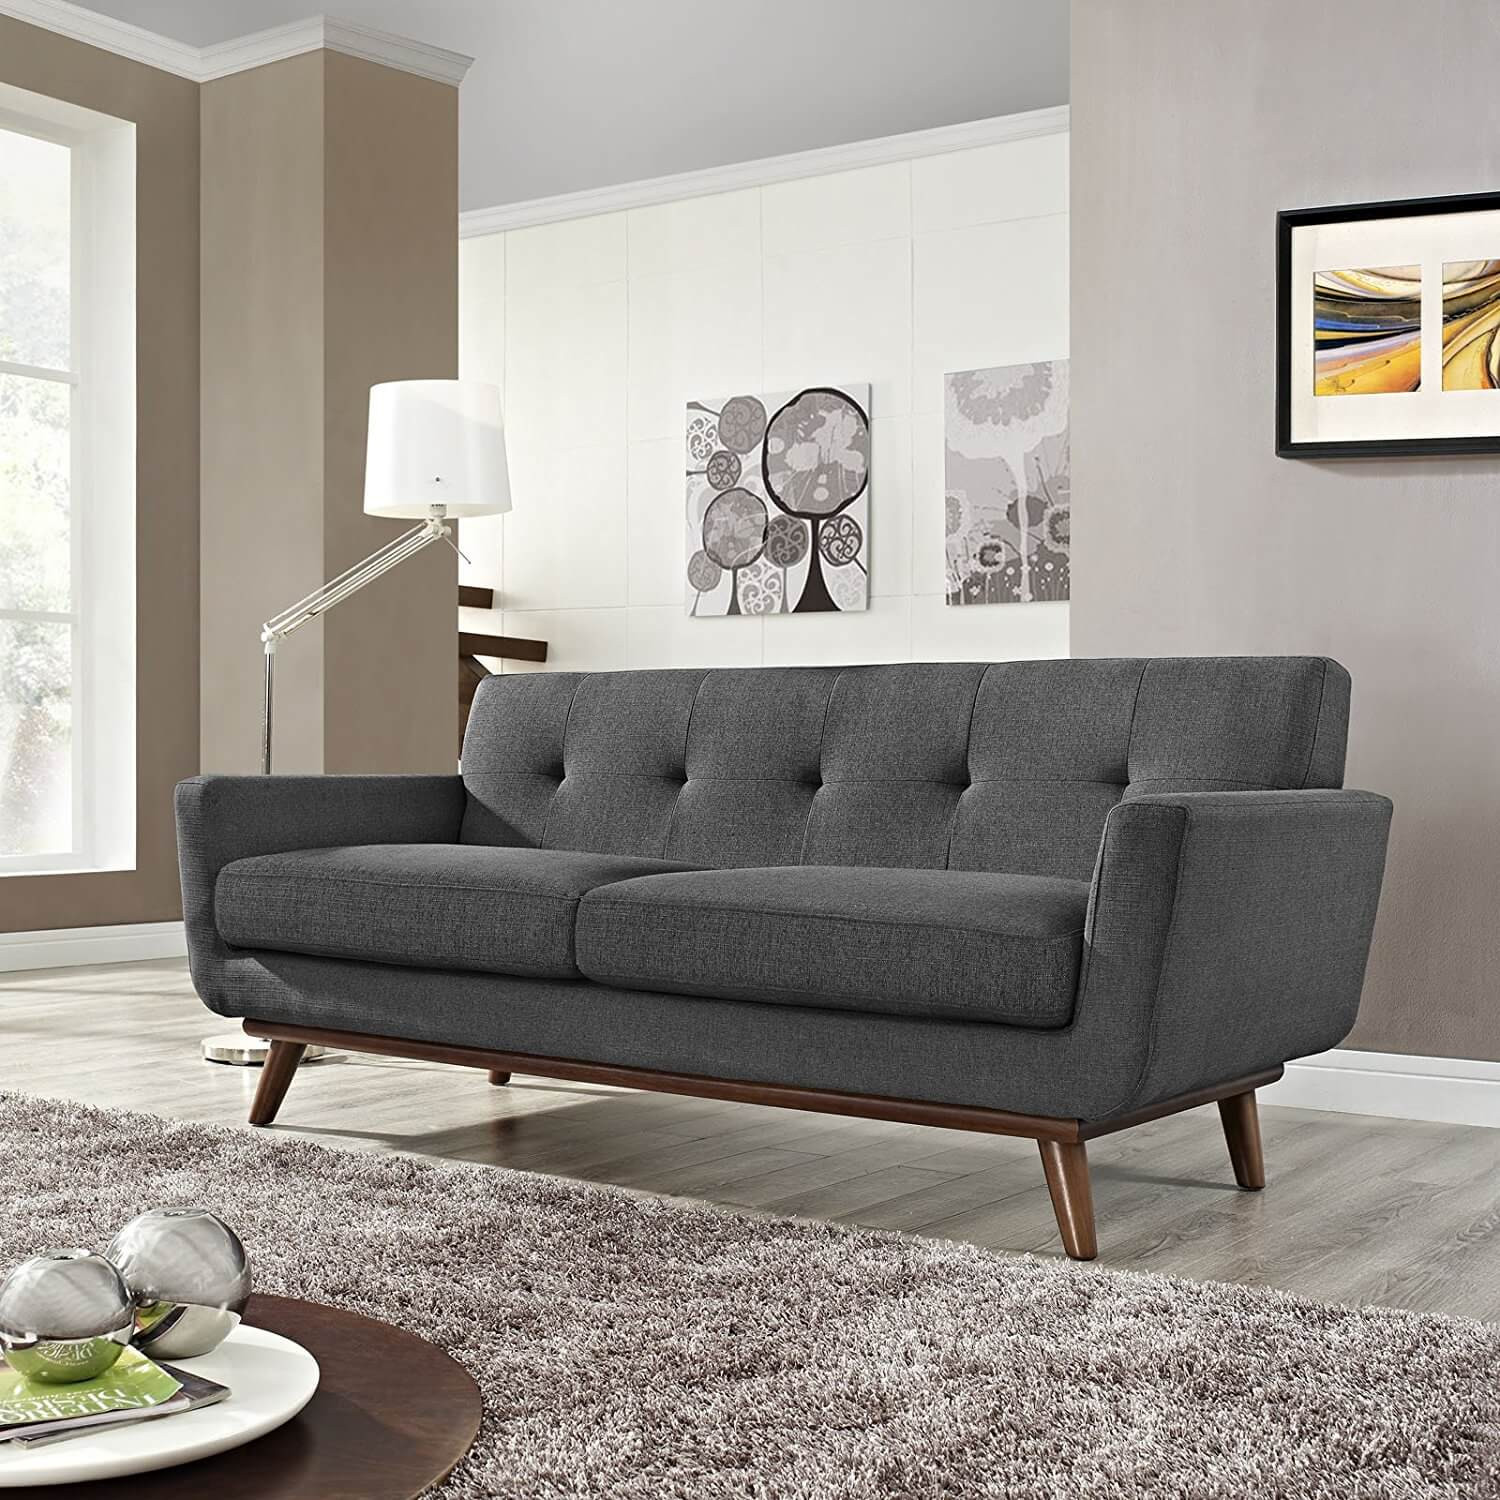 Design Sofa
 Looking for the Latest Sofa Designs in 2018